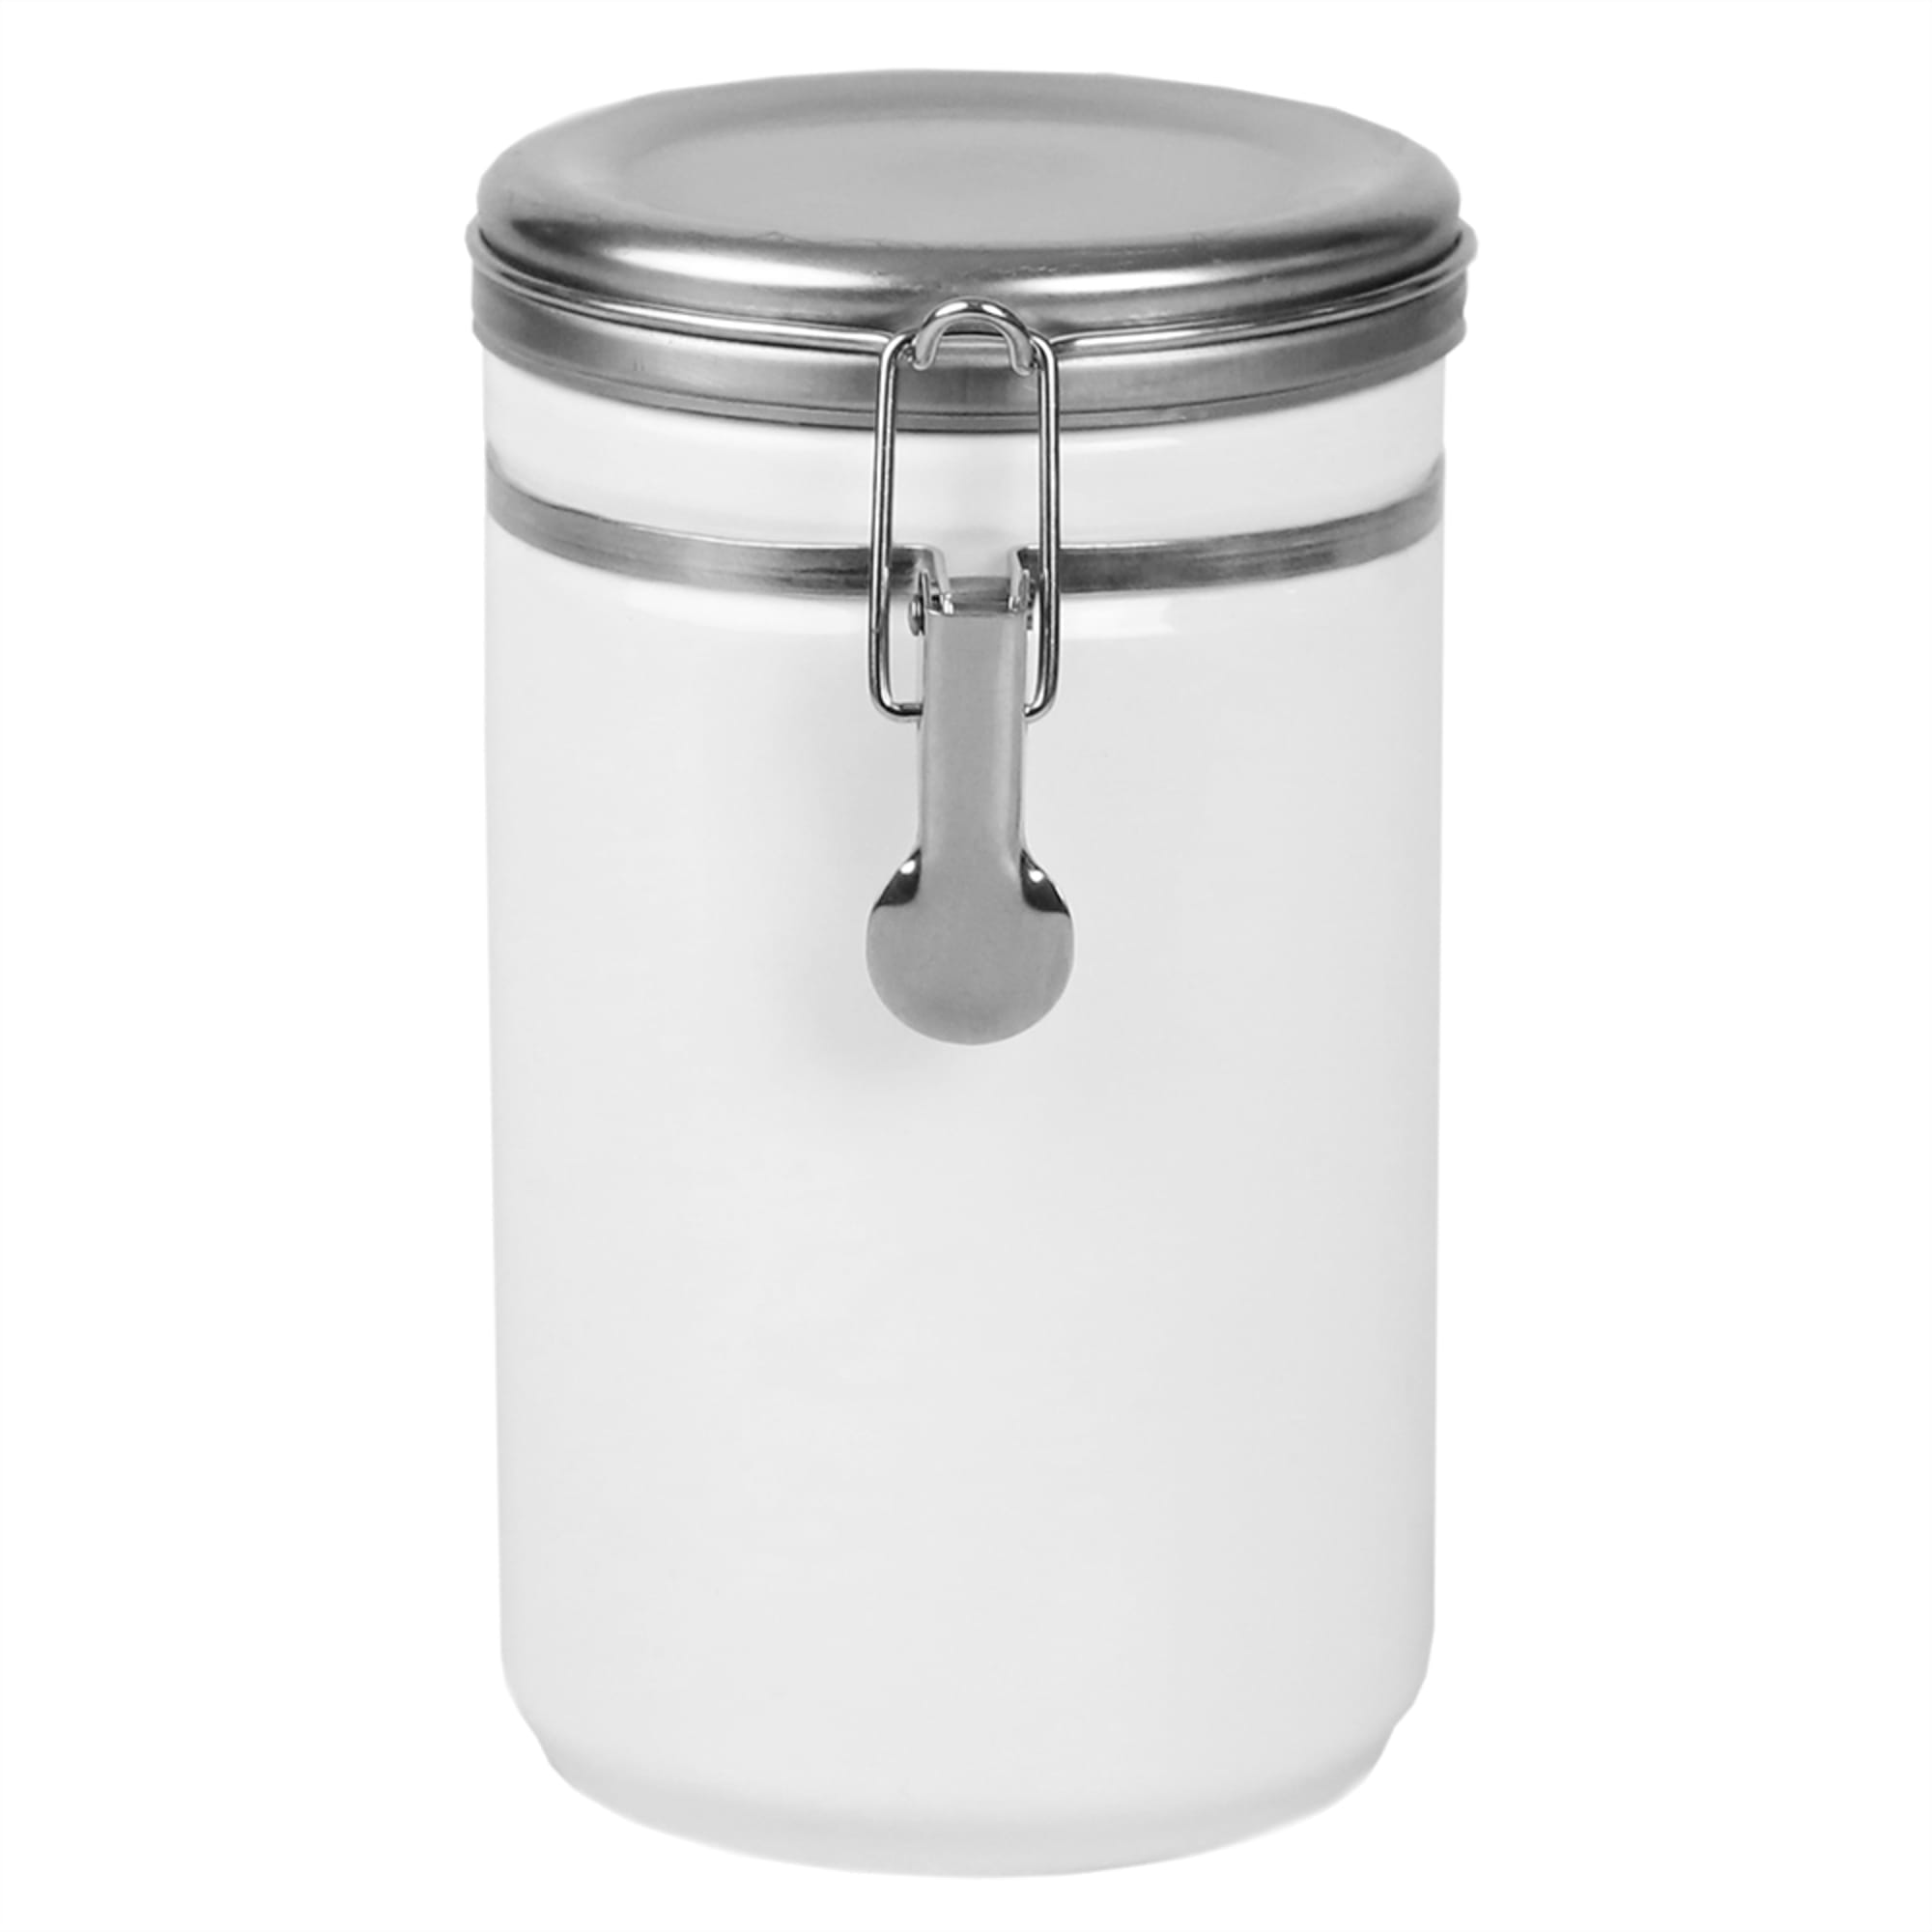 Home Basics 45 oz. Canister with Stainless Steel Top, White $8 EACH, CASE PACK OF 8